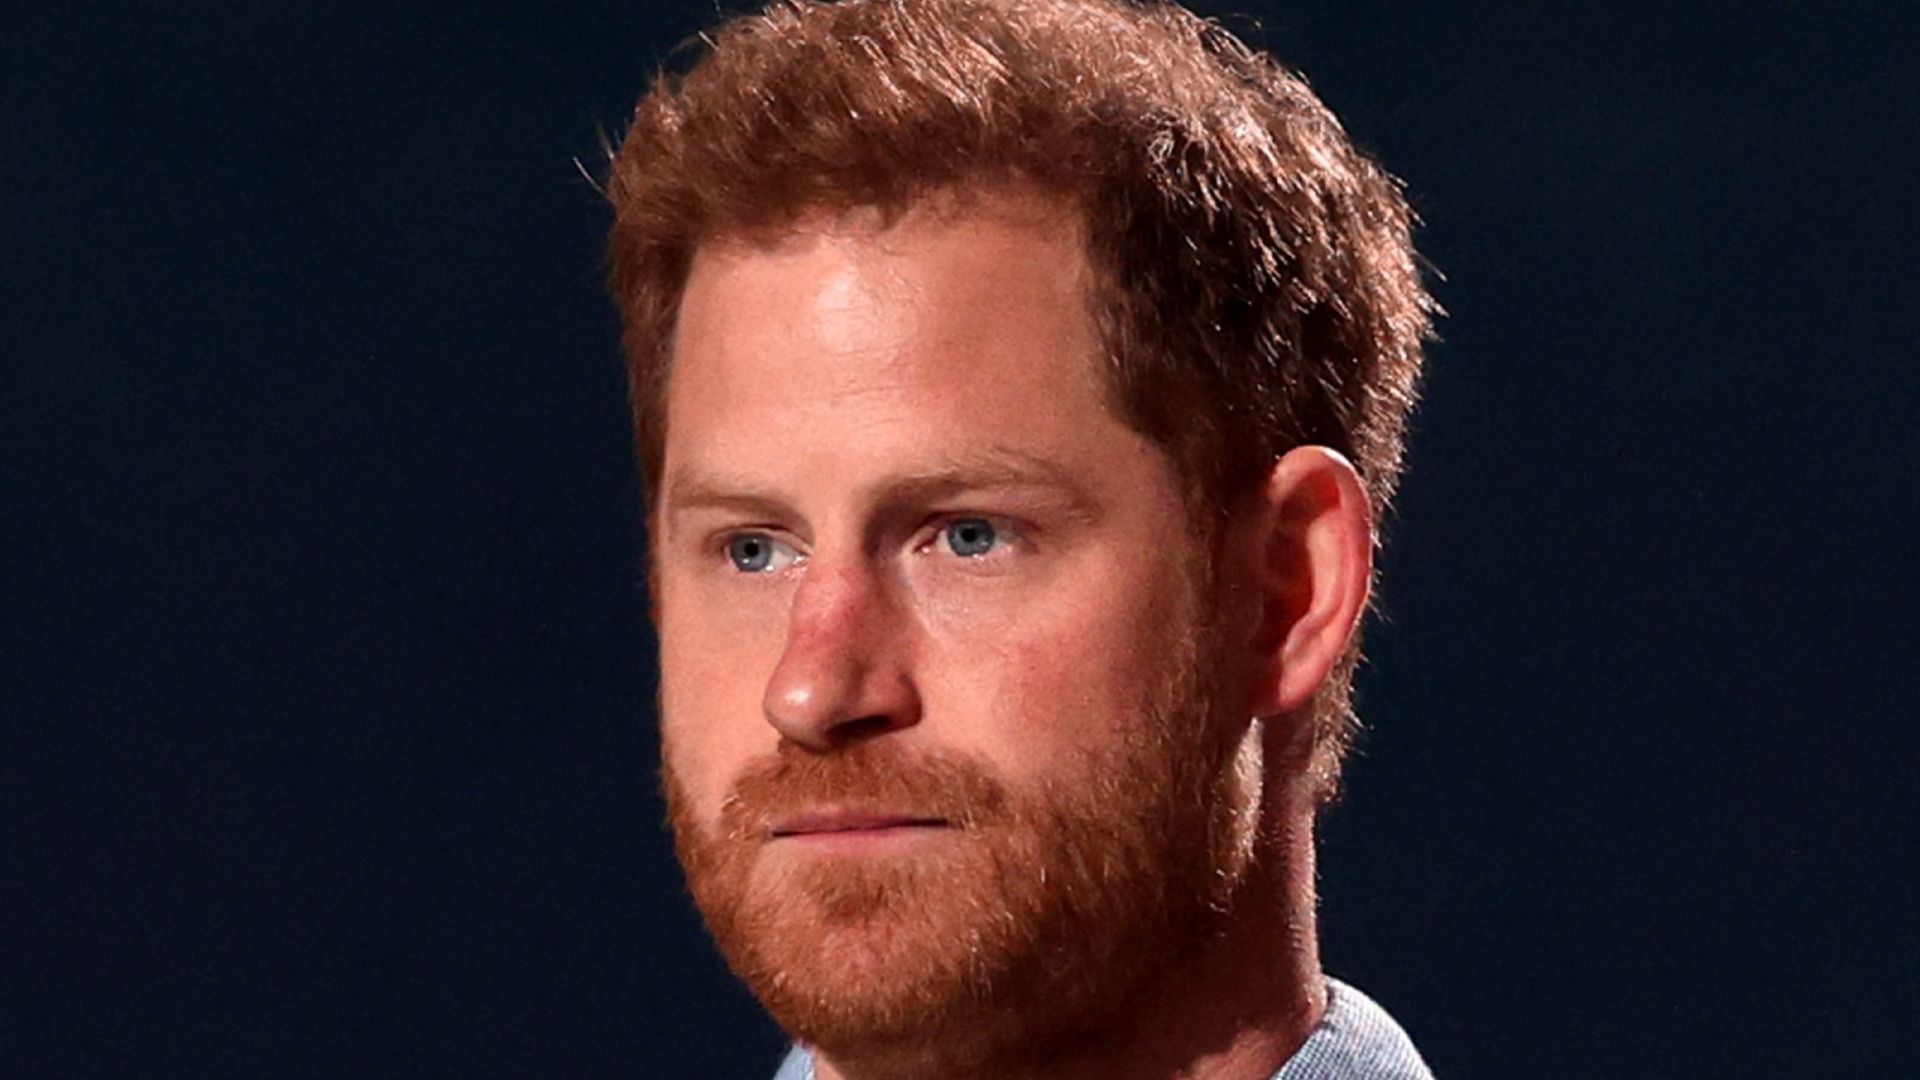 Prince Harry files judicial review in desperate plea to return to UK